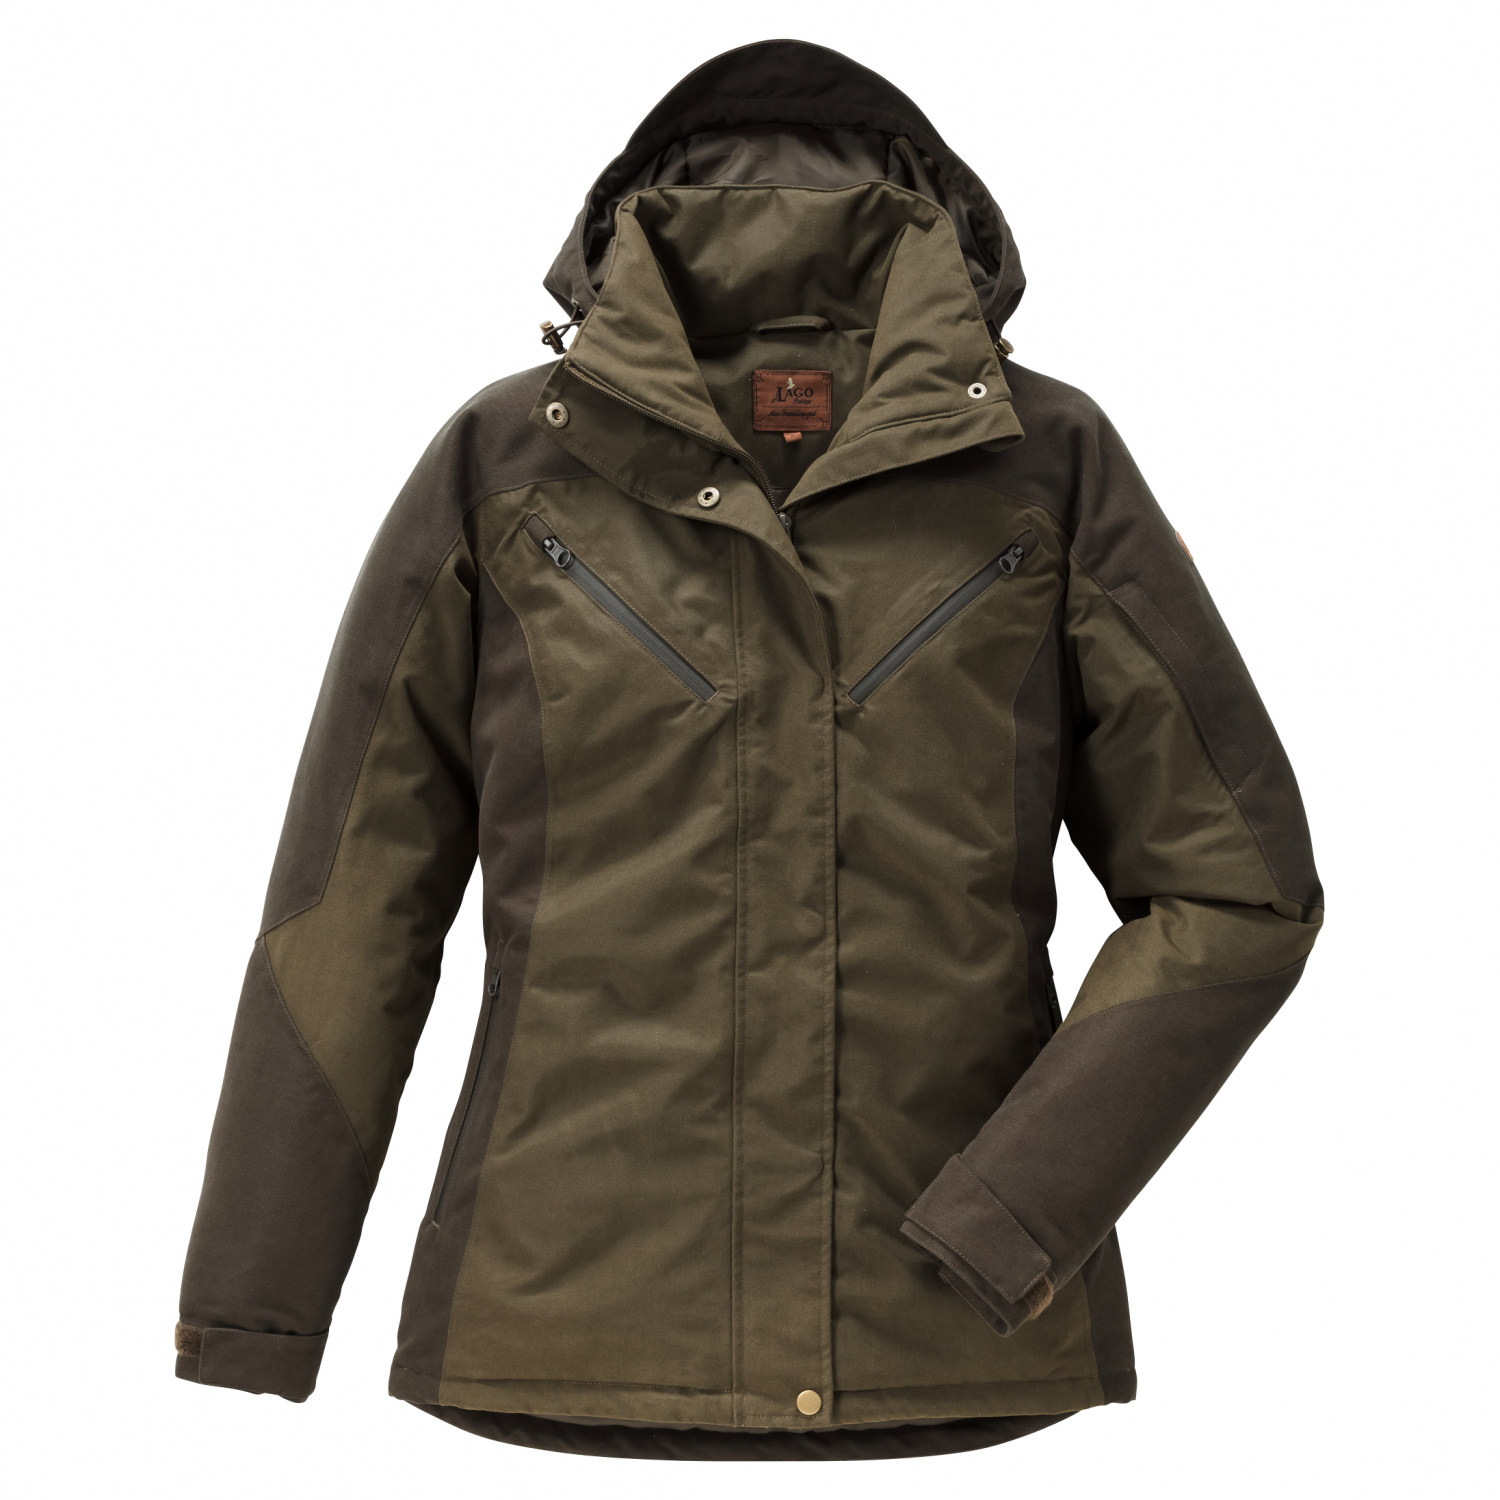 IL Lago Sie Womens Extreme Jacket Geo Pro at low prices